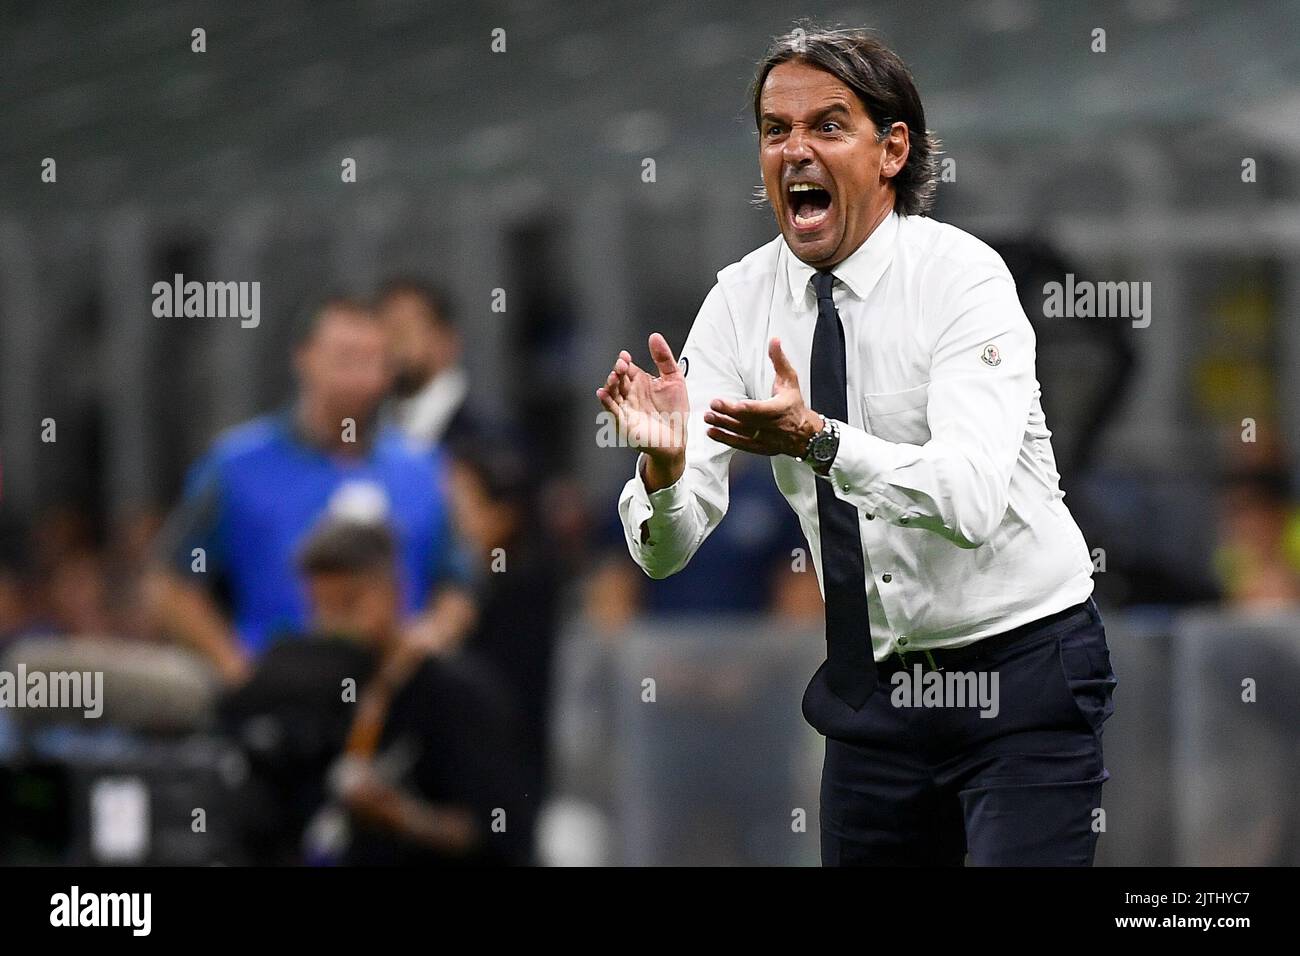 Milan, Italy. 30 August 2022. Simone Inzaghi, head coach of FC Internazionale, reacts during the Serie A football match between FC Internazionale and US Cremonese. Credit: Nicolò Campo/Alamy Live News Stock Photo